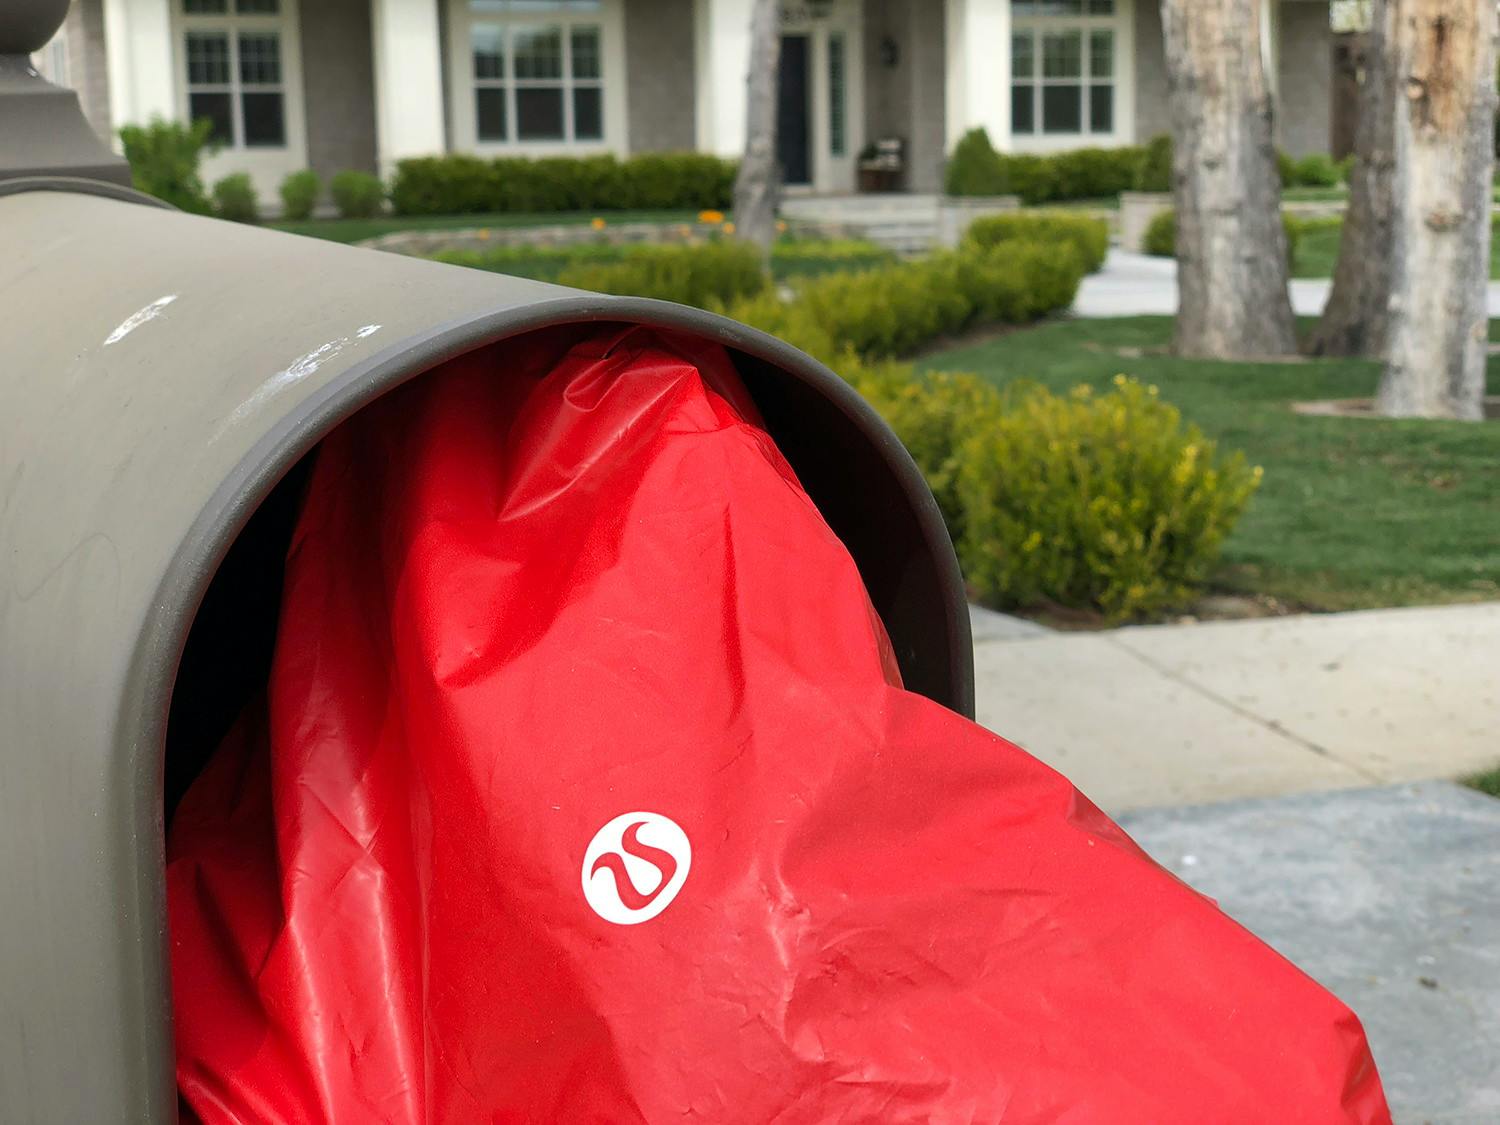 a red lululemon shipping bag shoved into a residential mailbox